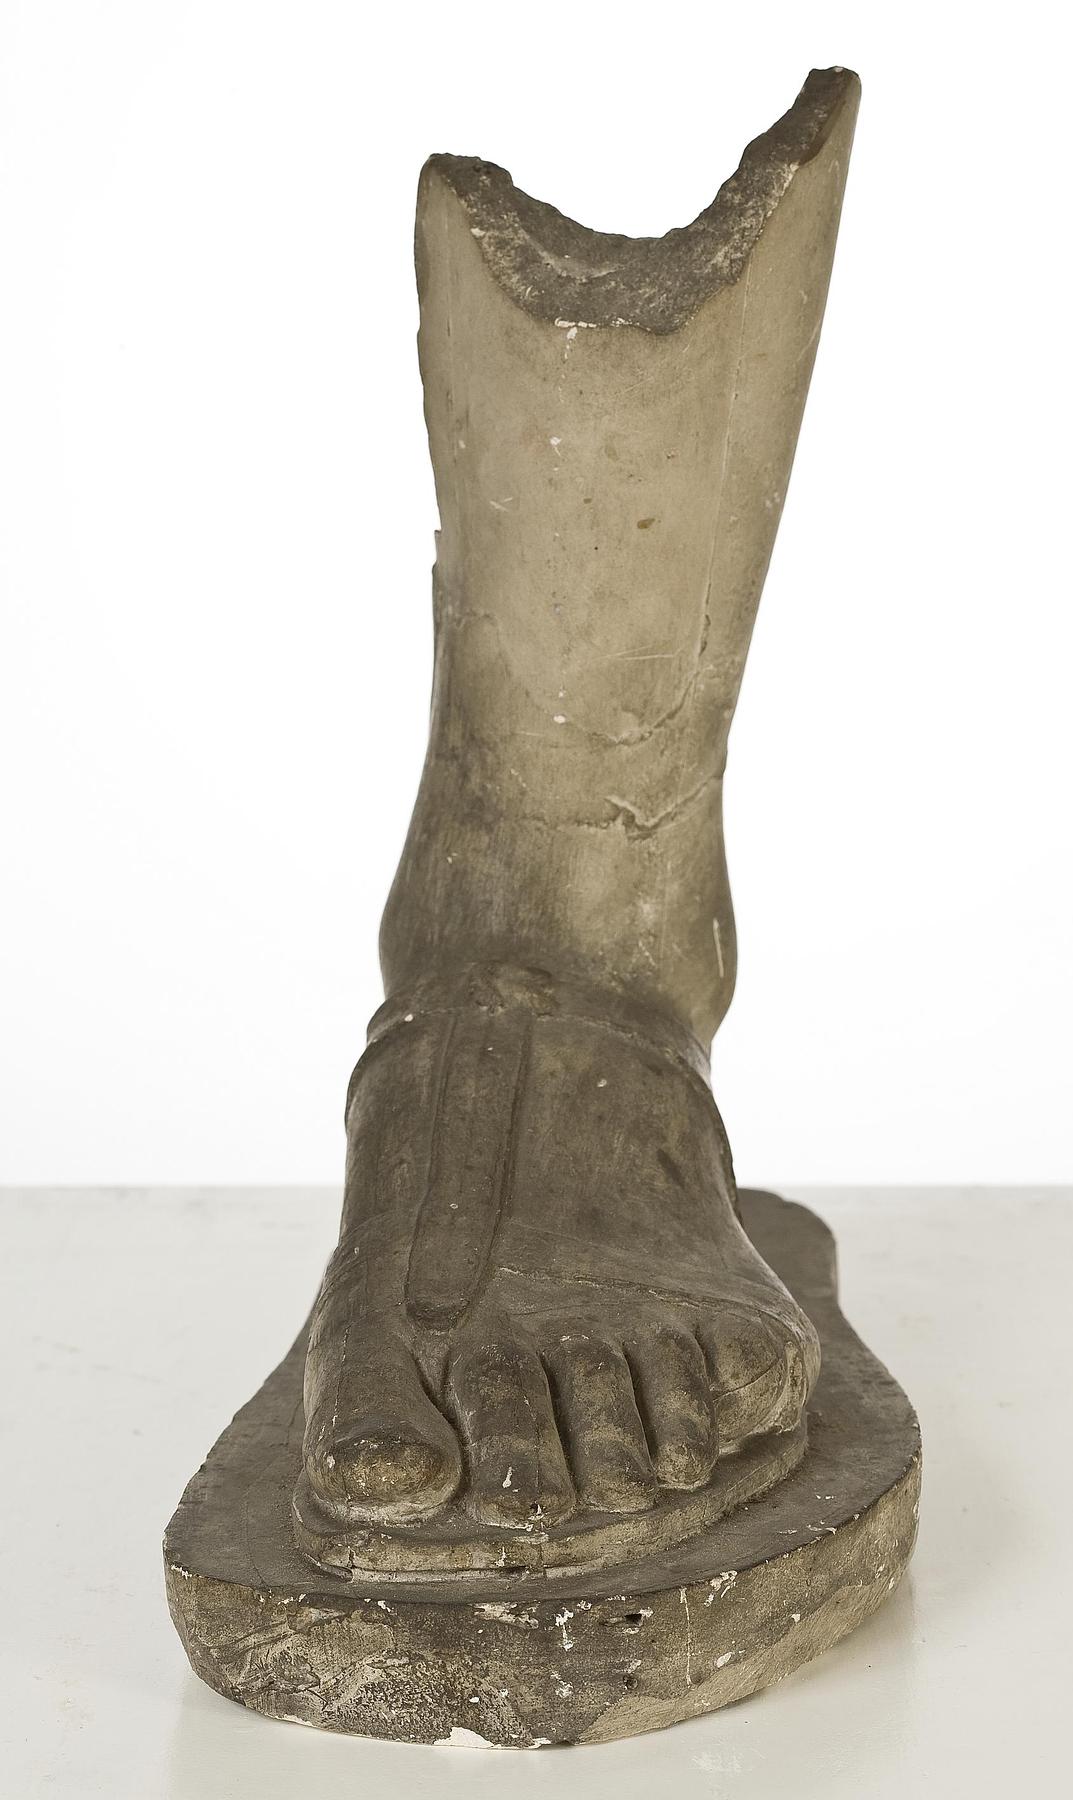 Left calf and foot of The Capitoline Camillus, L71b